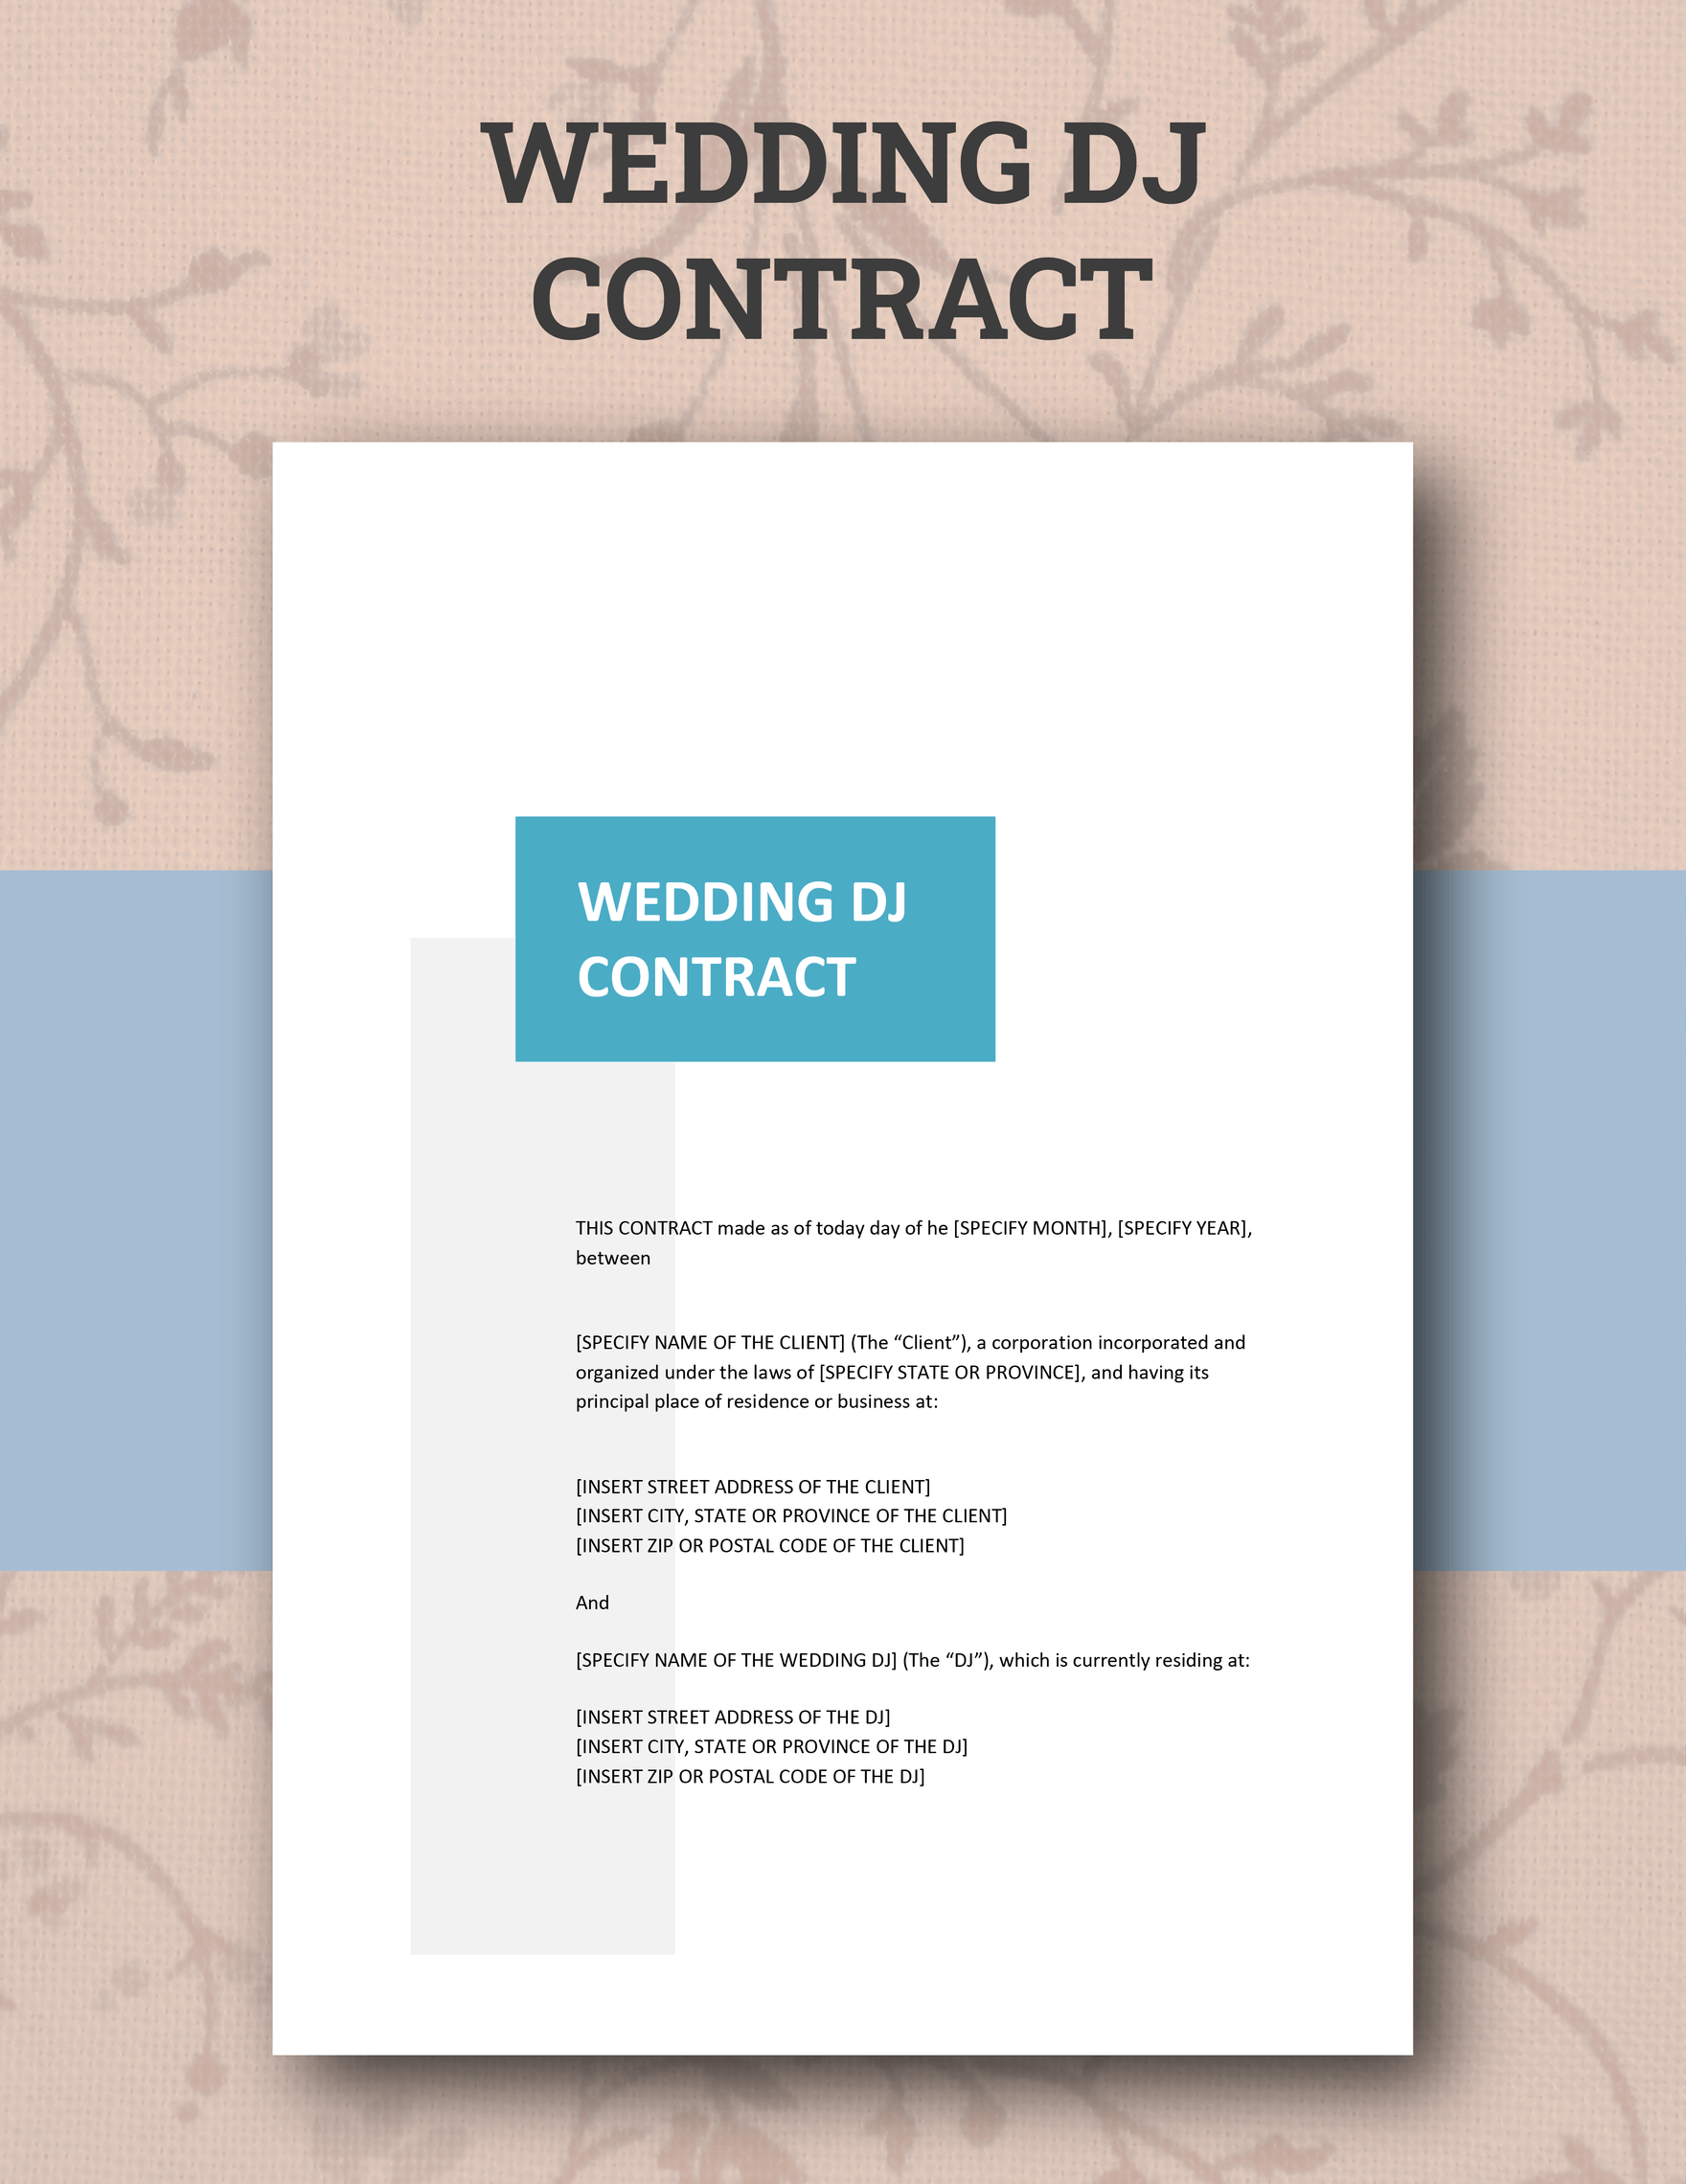 Wedding DJ Contract Template in Word, Google Docs, Apple Pages